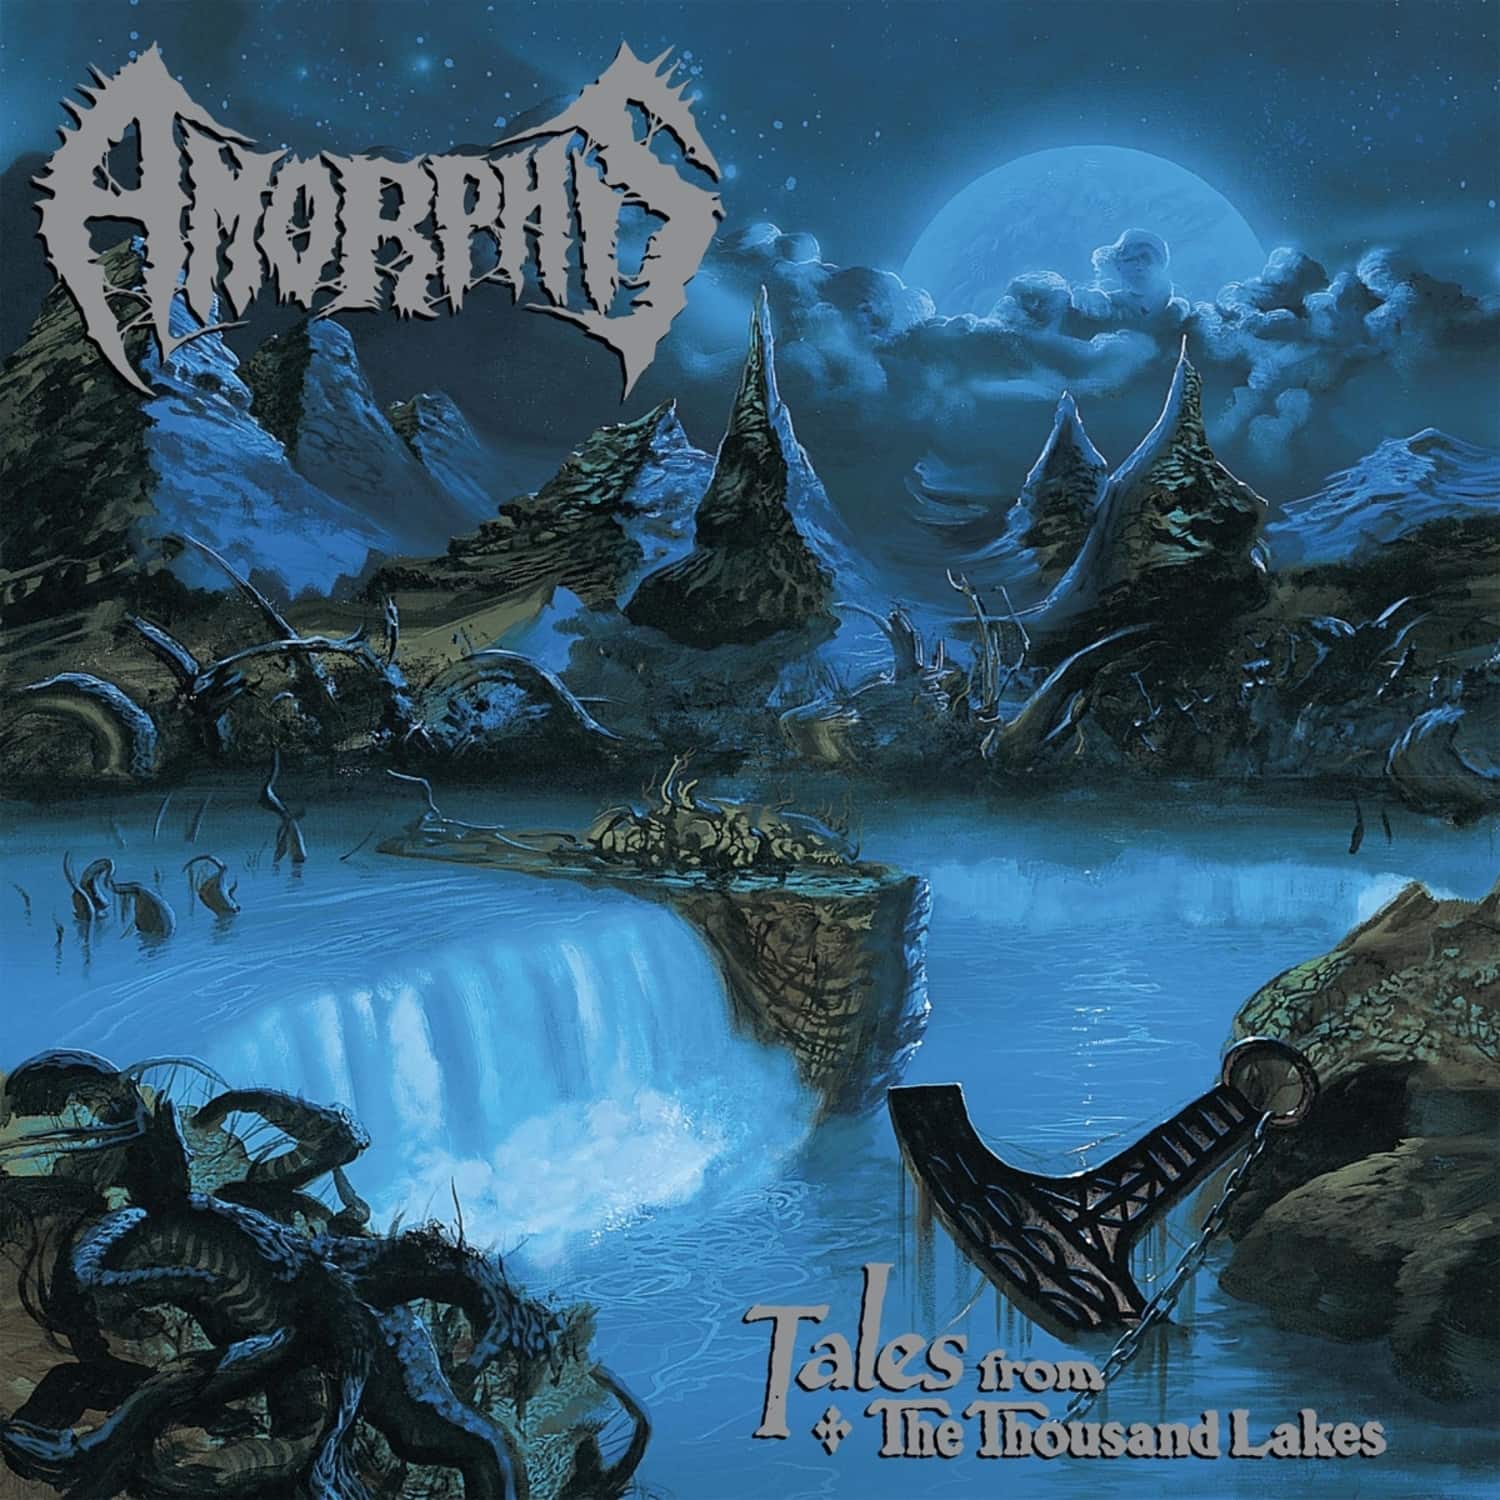 Amorphis - TALES FROM THE THOUSAND LAKES 